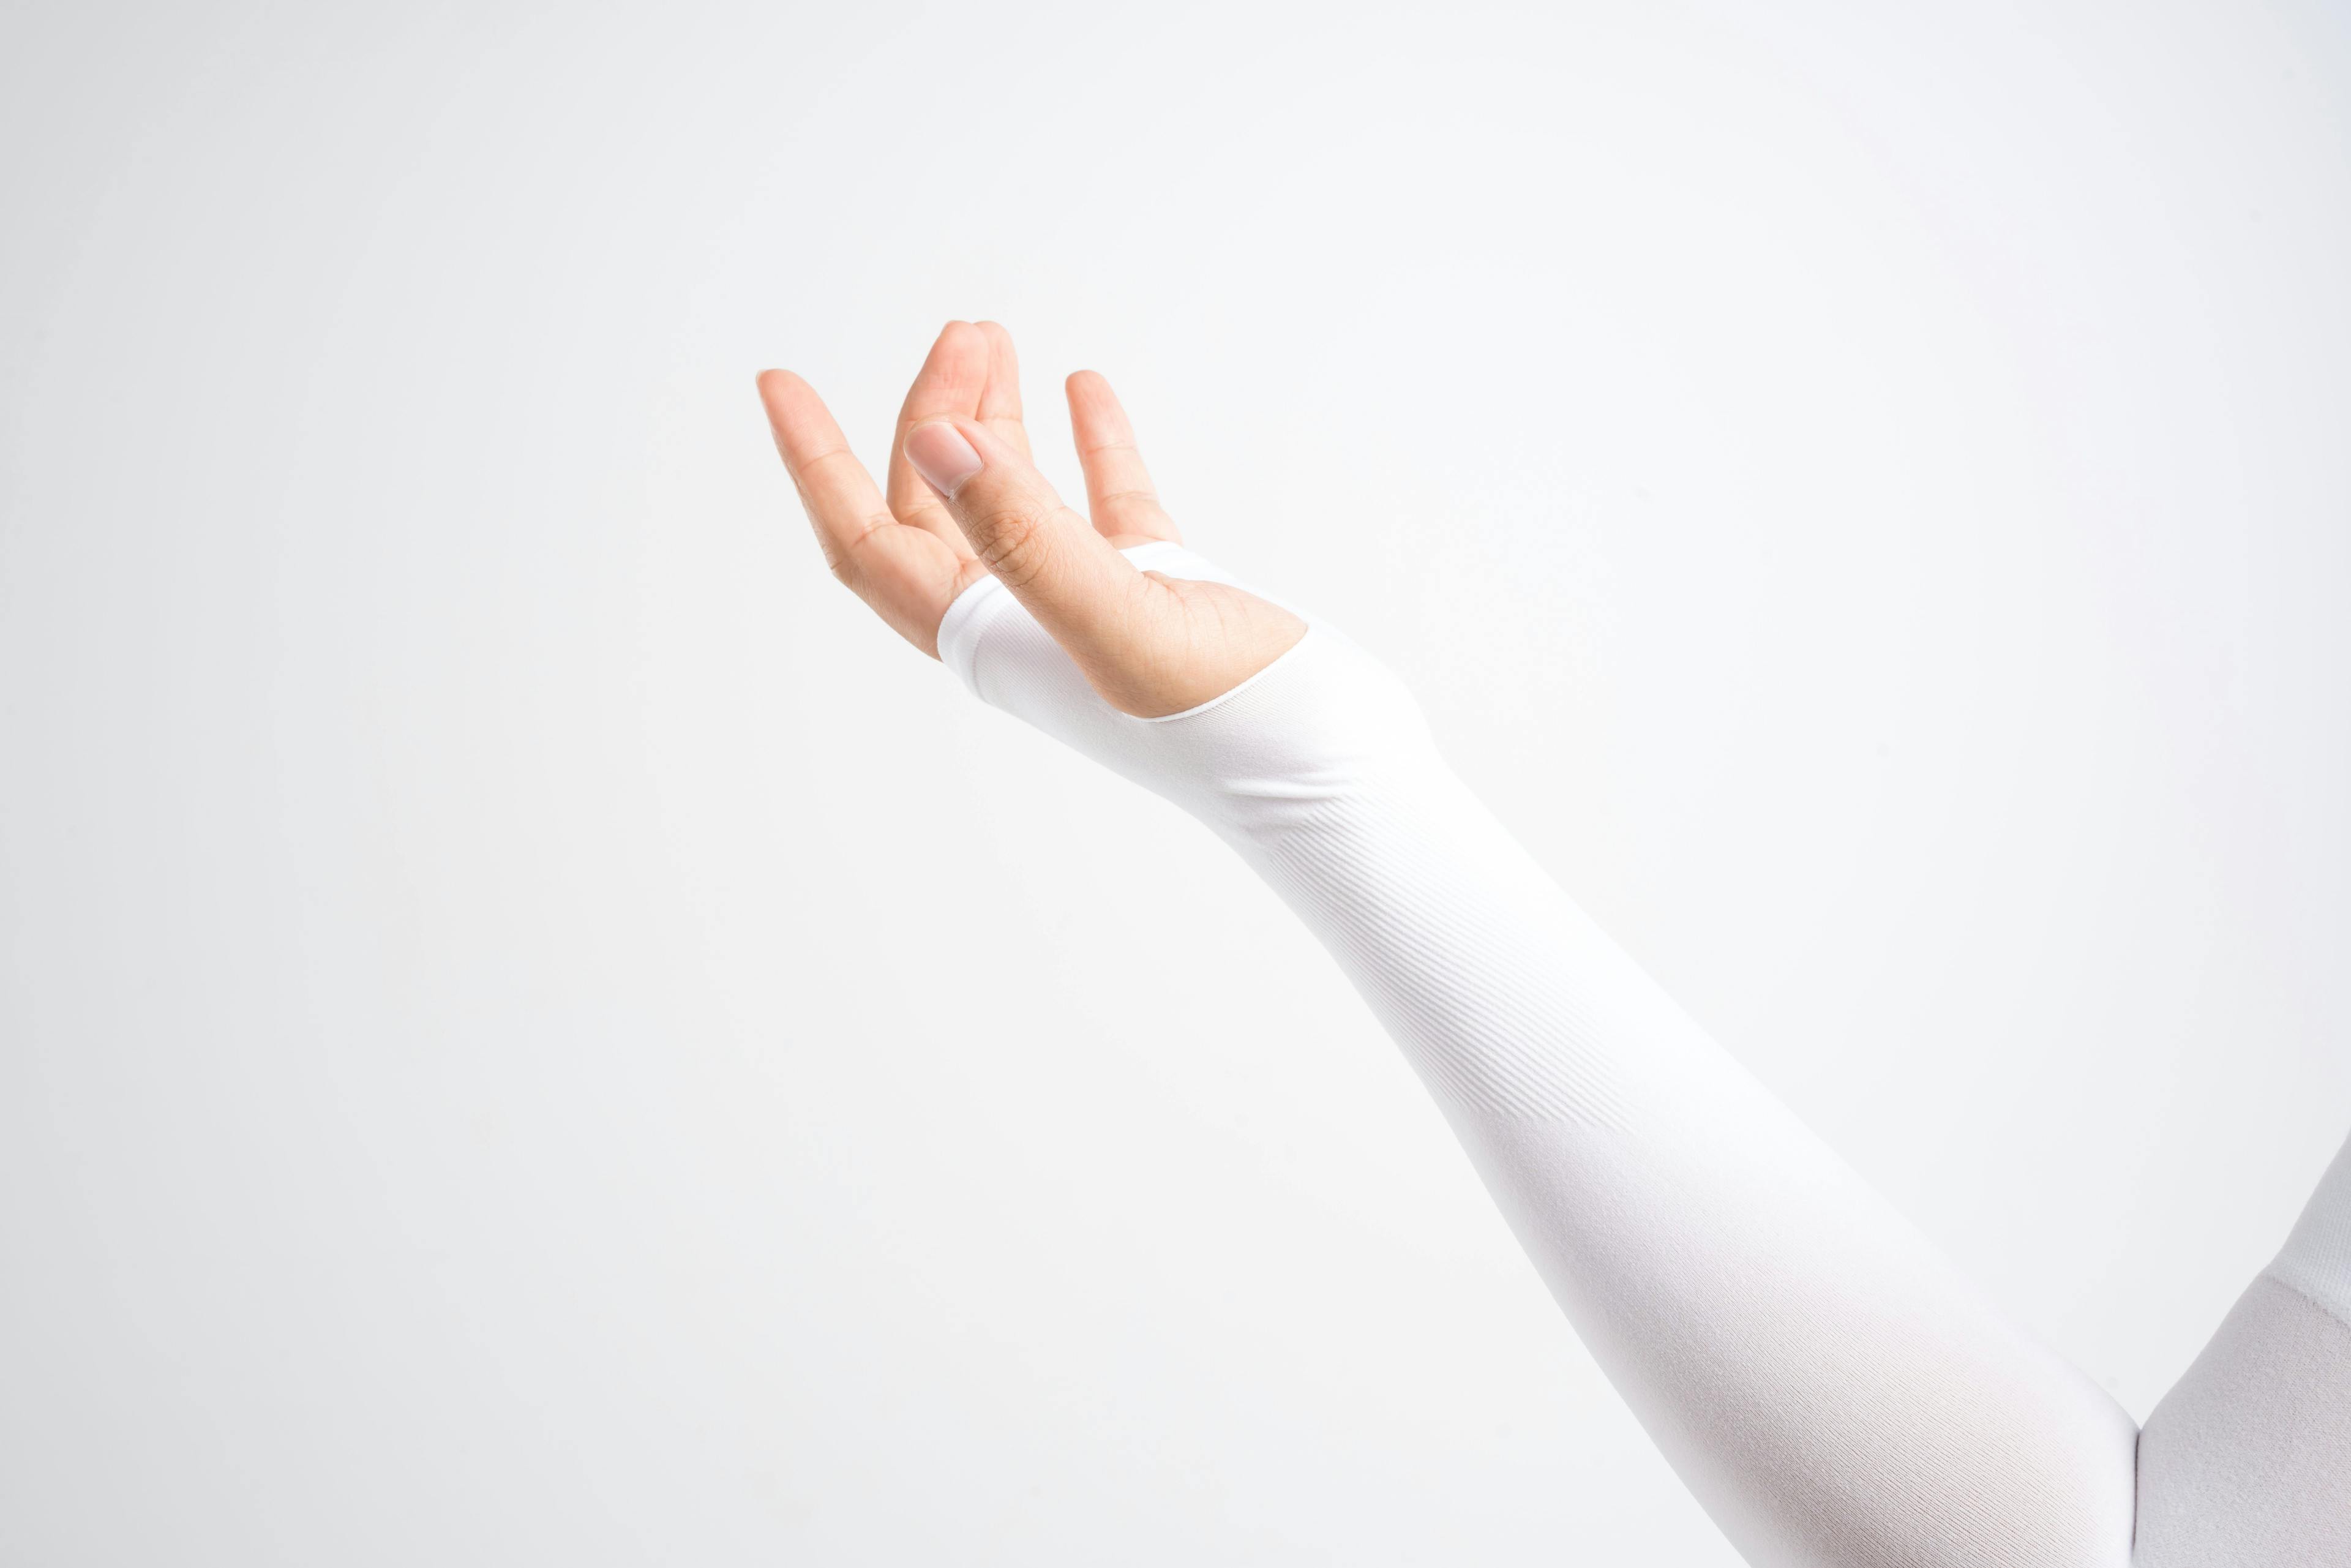 Lymphedema arm garment: Hand with elastic wrist and arm support for relieve injury | Image credit: © - bonnontawat © - stock.adobe.com